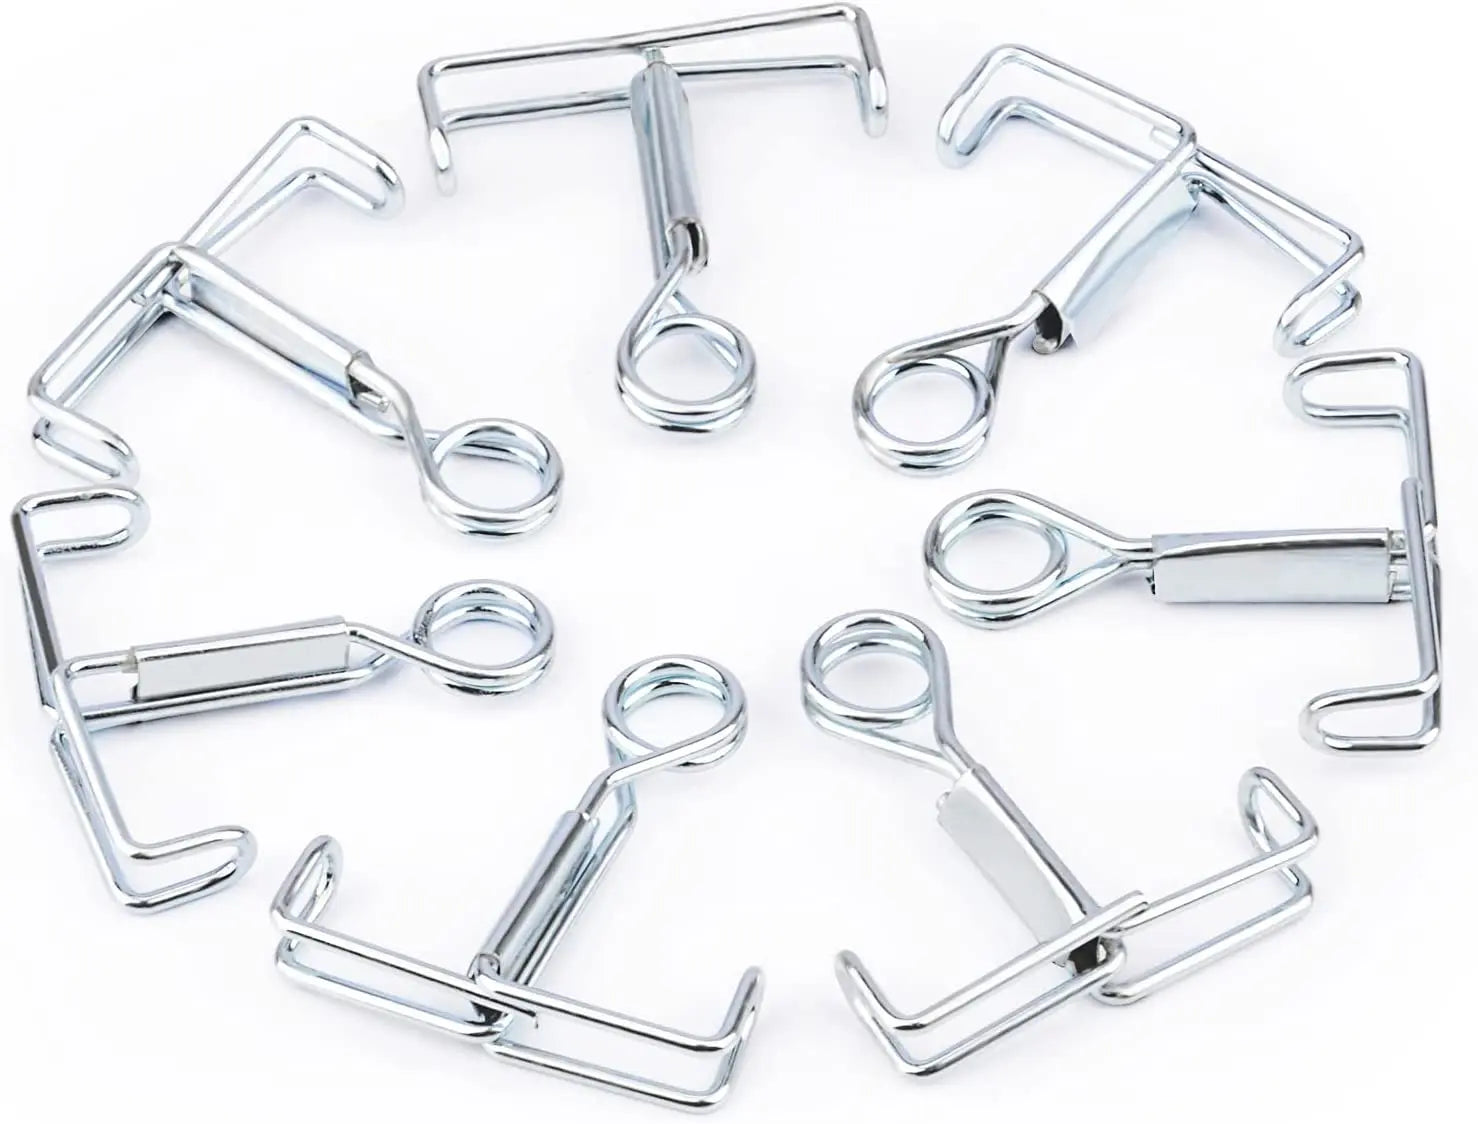 Mohr's Pinchcock, 7 Pack - StonyLab Mohr Pinchcock Clamps 